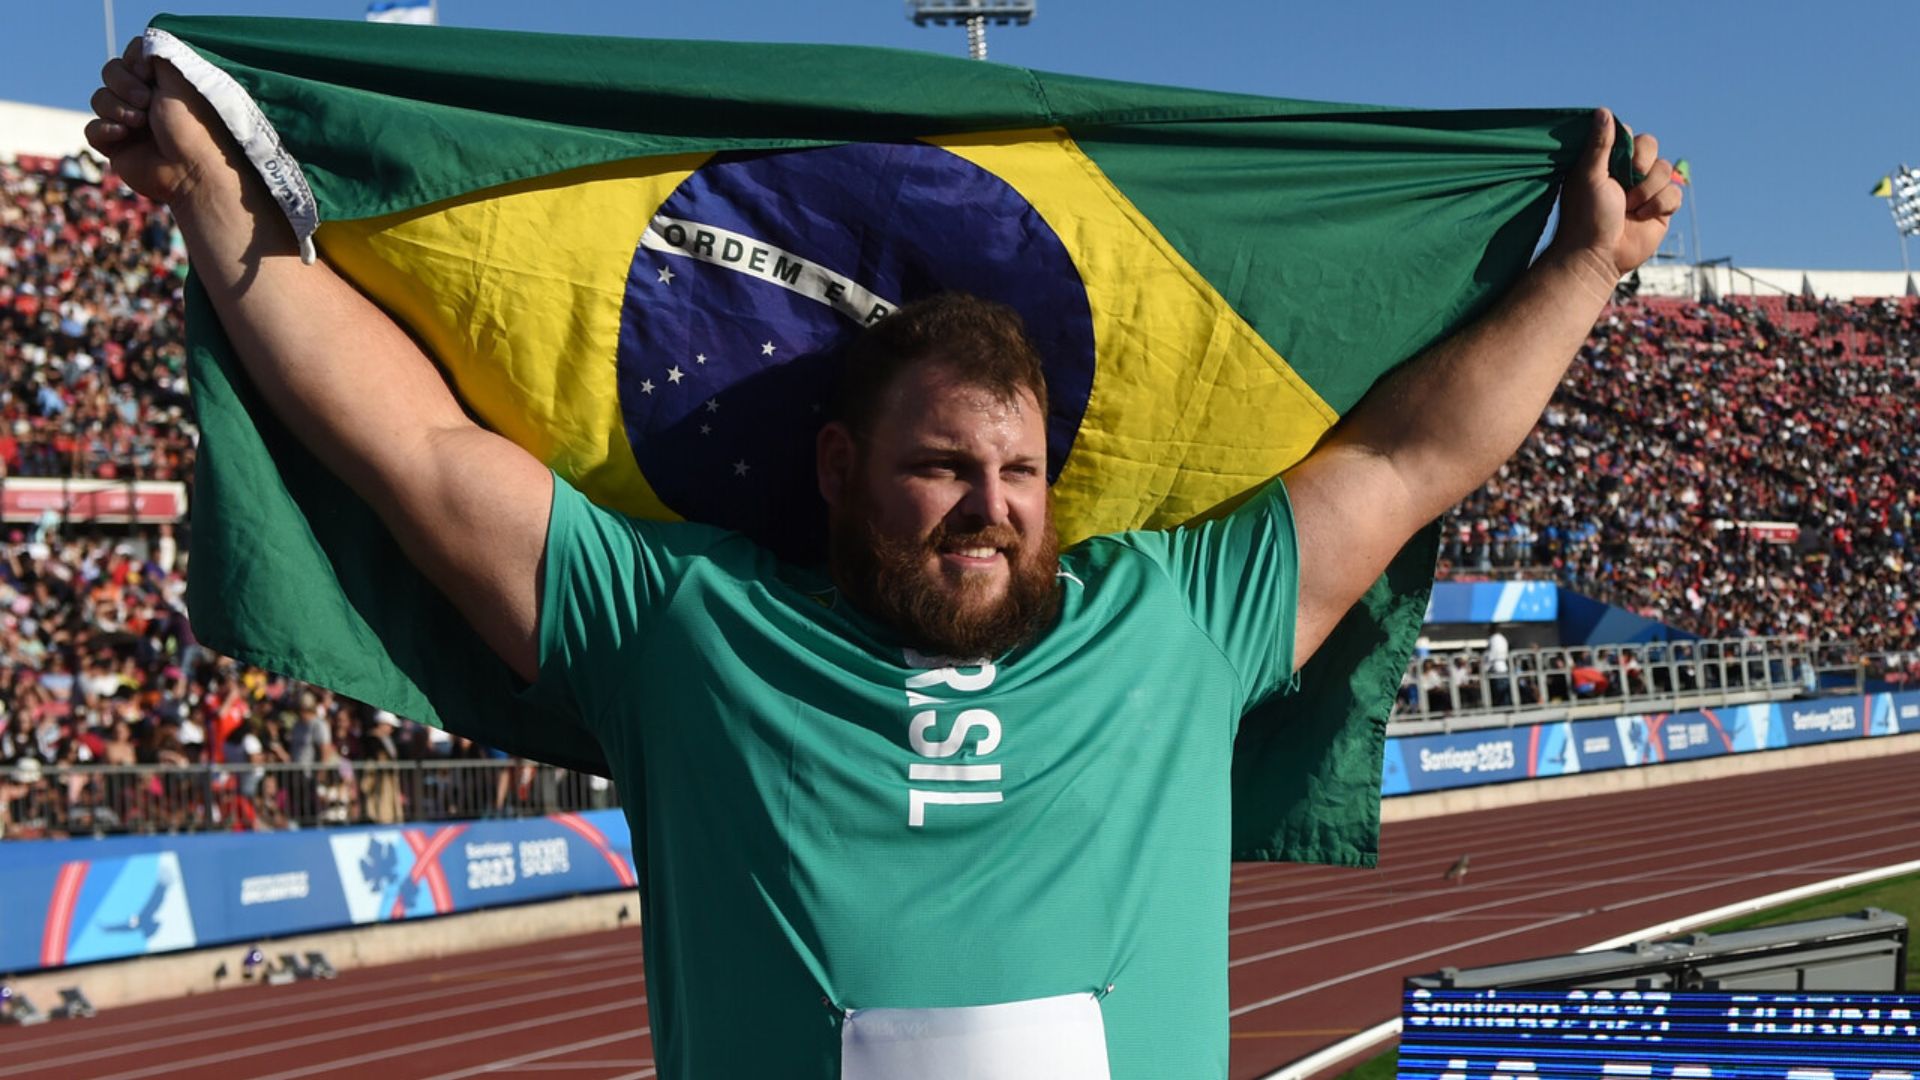 Darlan Romani lives up to the favoritism and wins gold in shot put